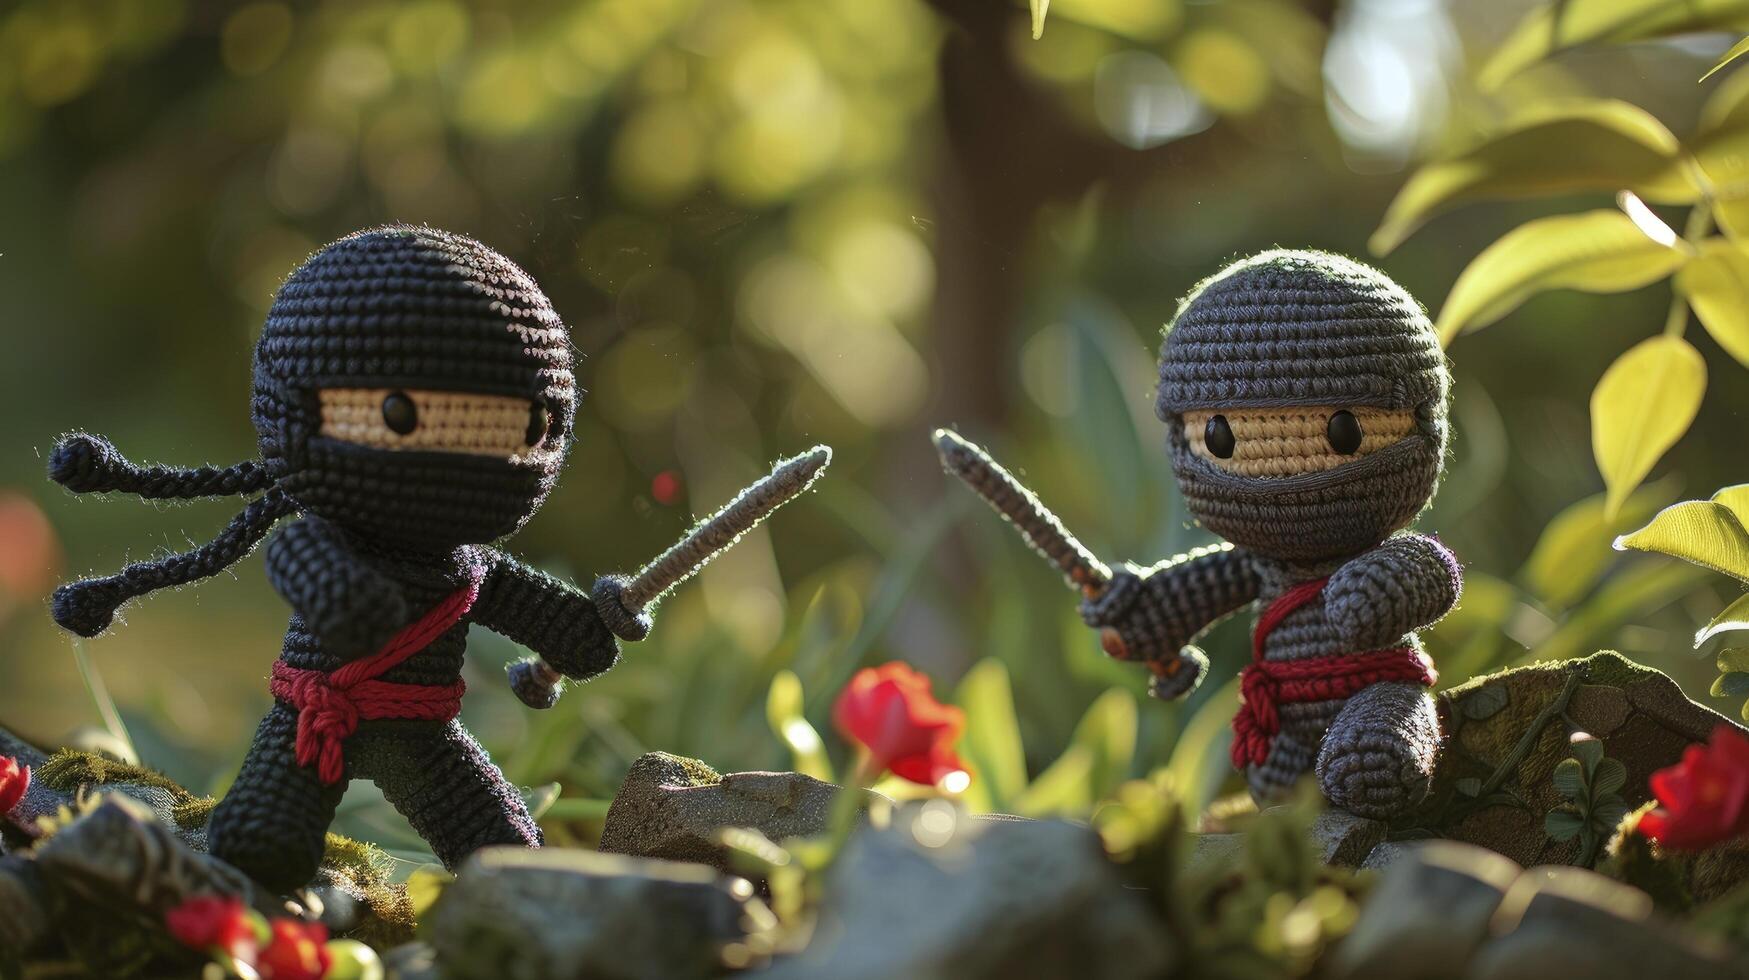 AI generated Whimsical Adventure. Ninja-Themed Amigurumi Characters Embark on an Epic Journey. Dynamic Poses and Dramatic Lighting Create a Playful Scene in Top-Down Shot. photo